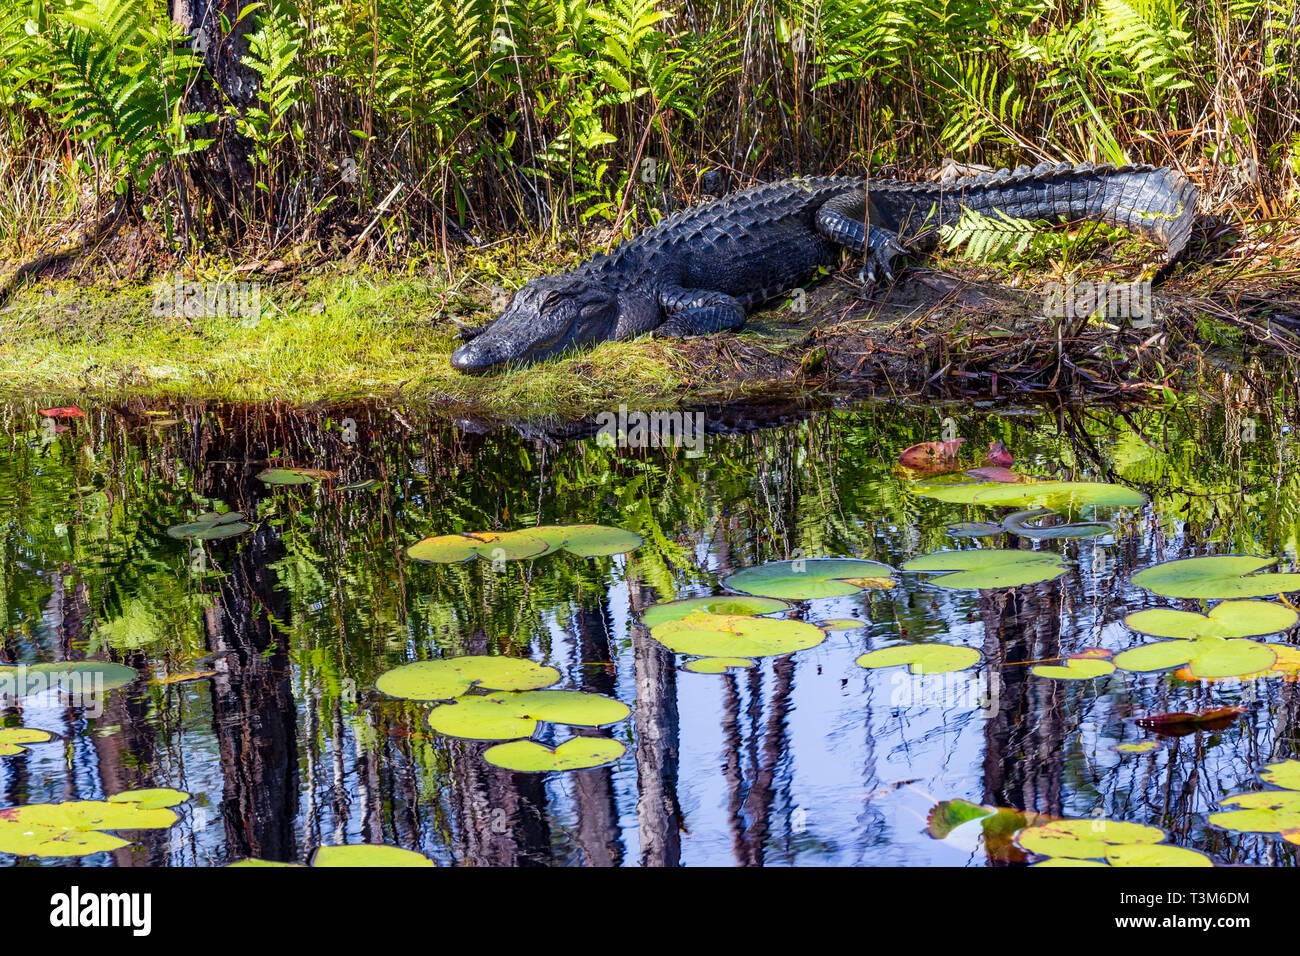 Adult American alligator resting in the sun on bank of Okefenokee swamp, with lily pads in foreground. Stock Photo